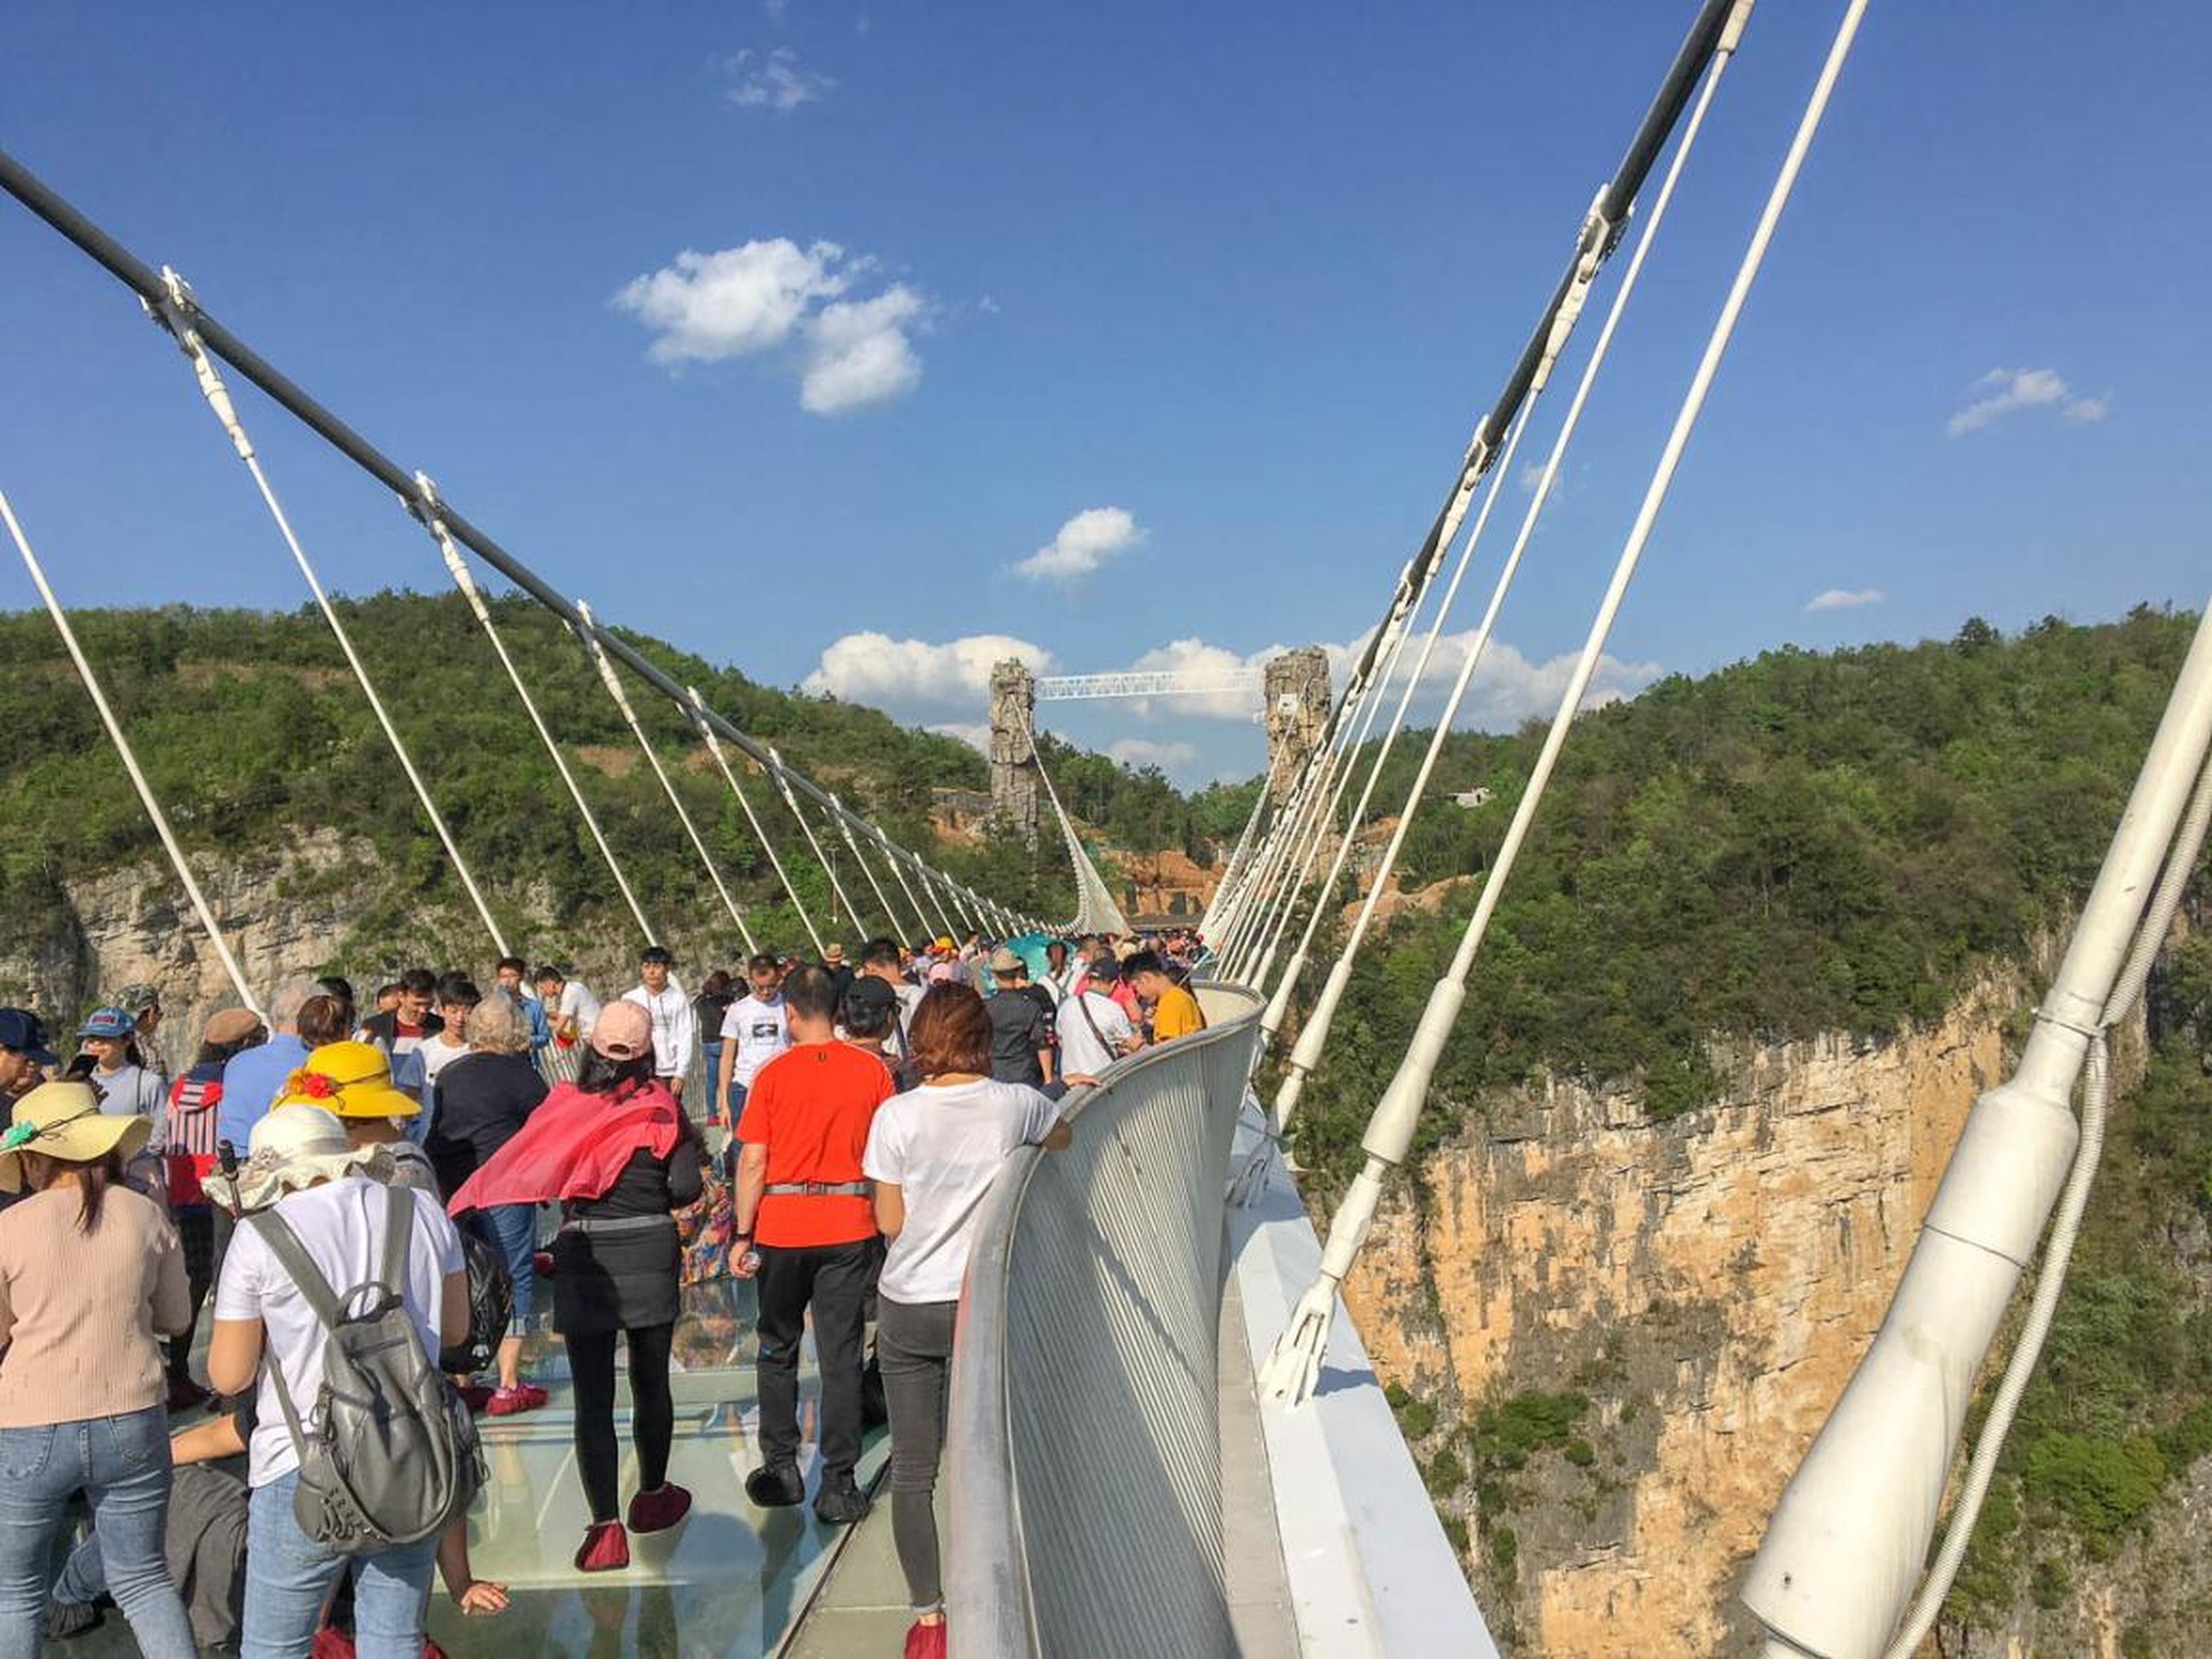 7. In China, I made the mistake of visiting a tourist attraction that had gone viral on Facebook and Instagram: the Zhangjiajie Grand Canyon Glass Bridge, the longest and highest glass bridge in the world. It was a crowded,